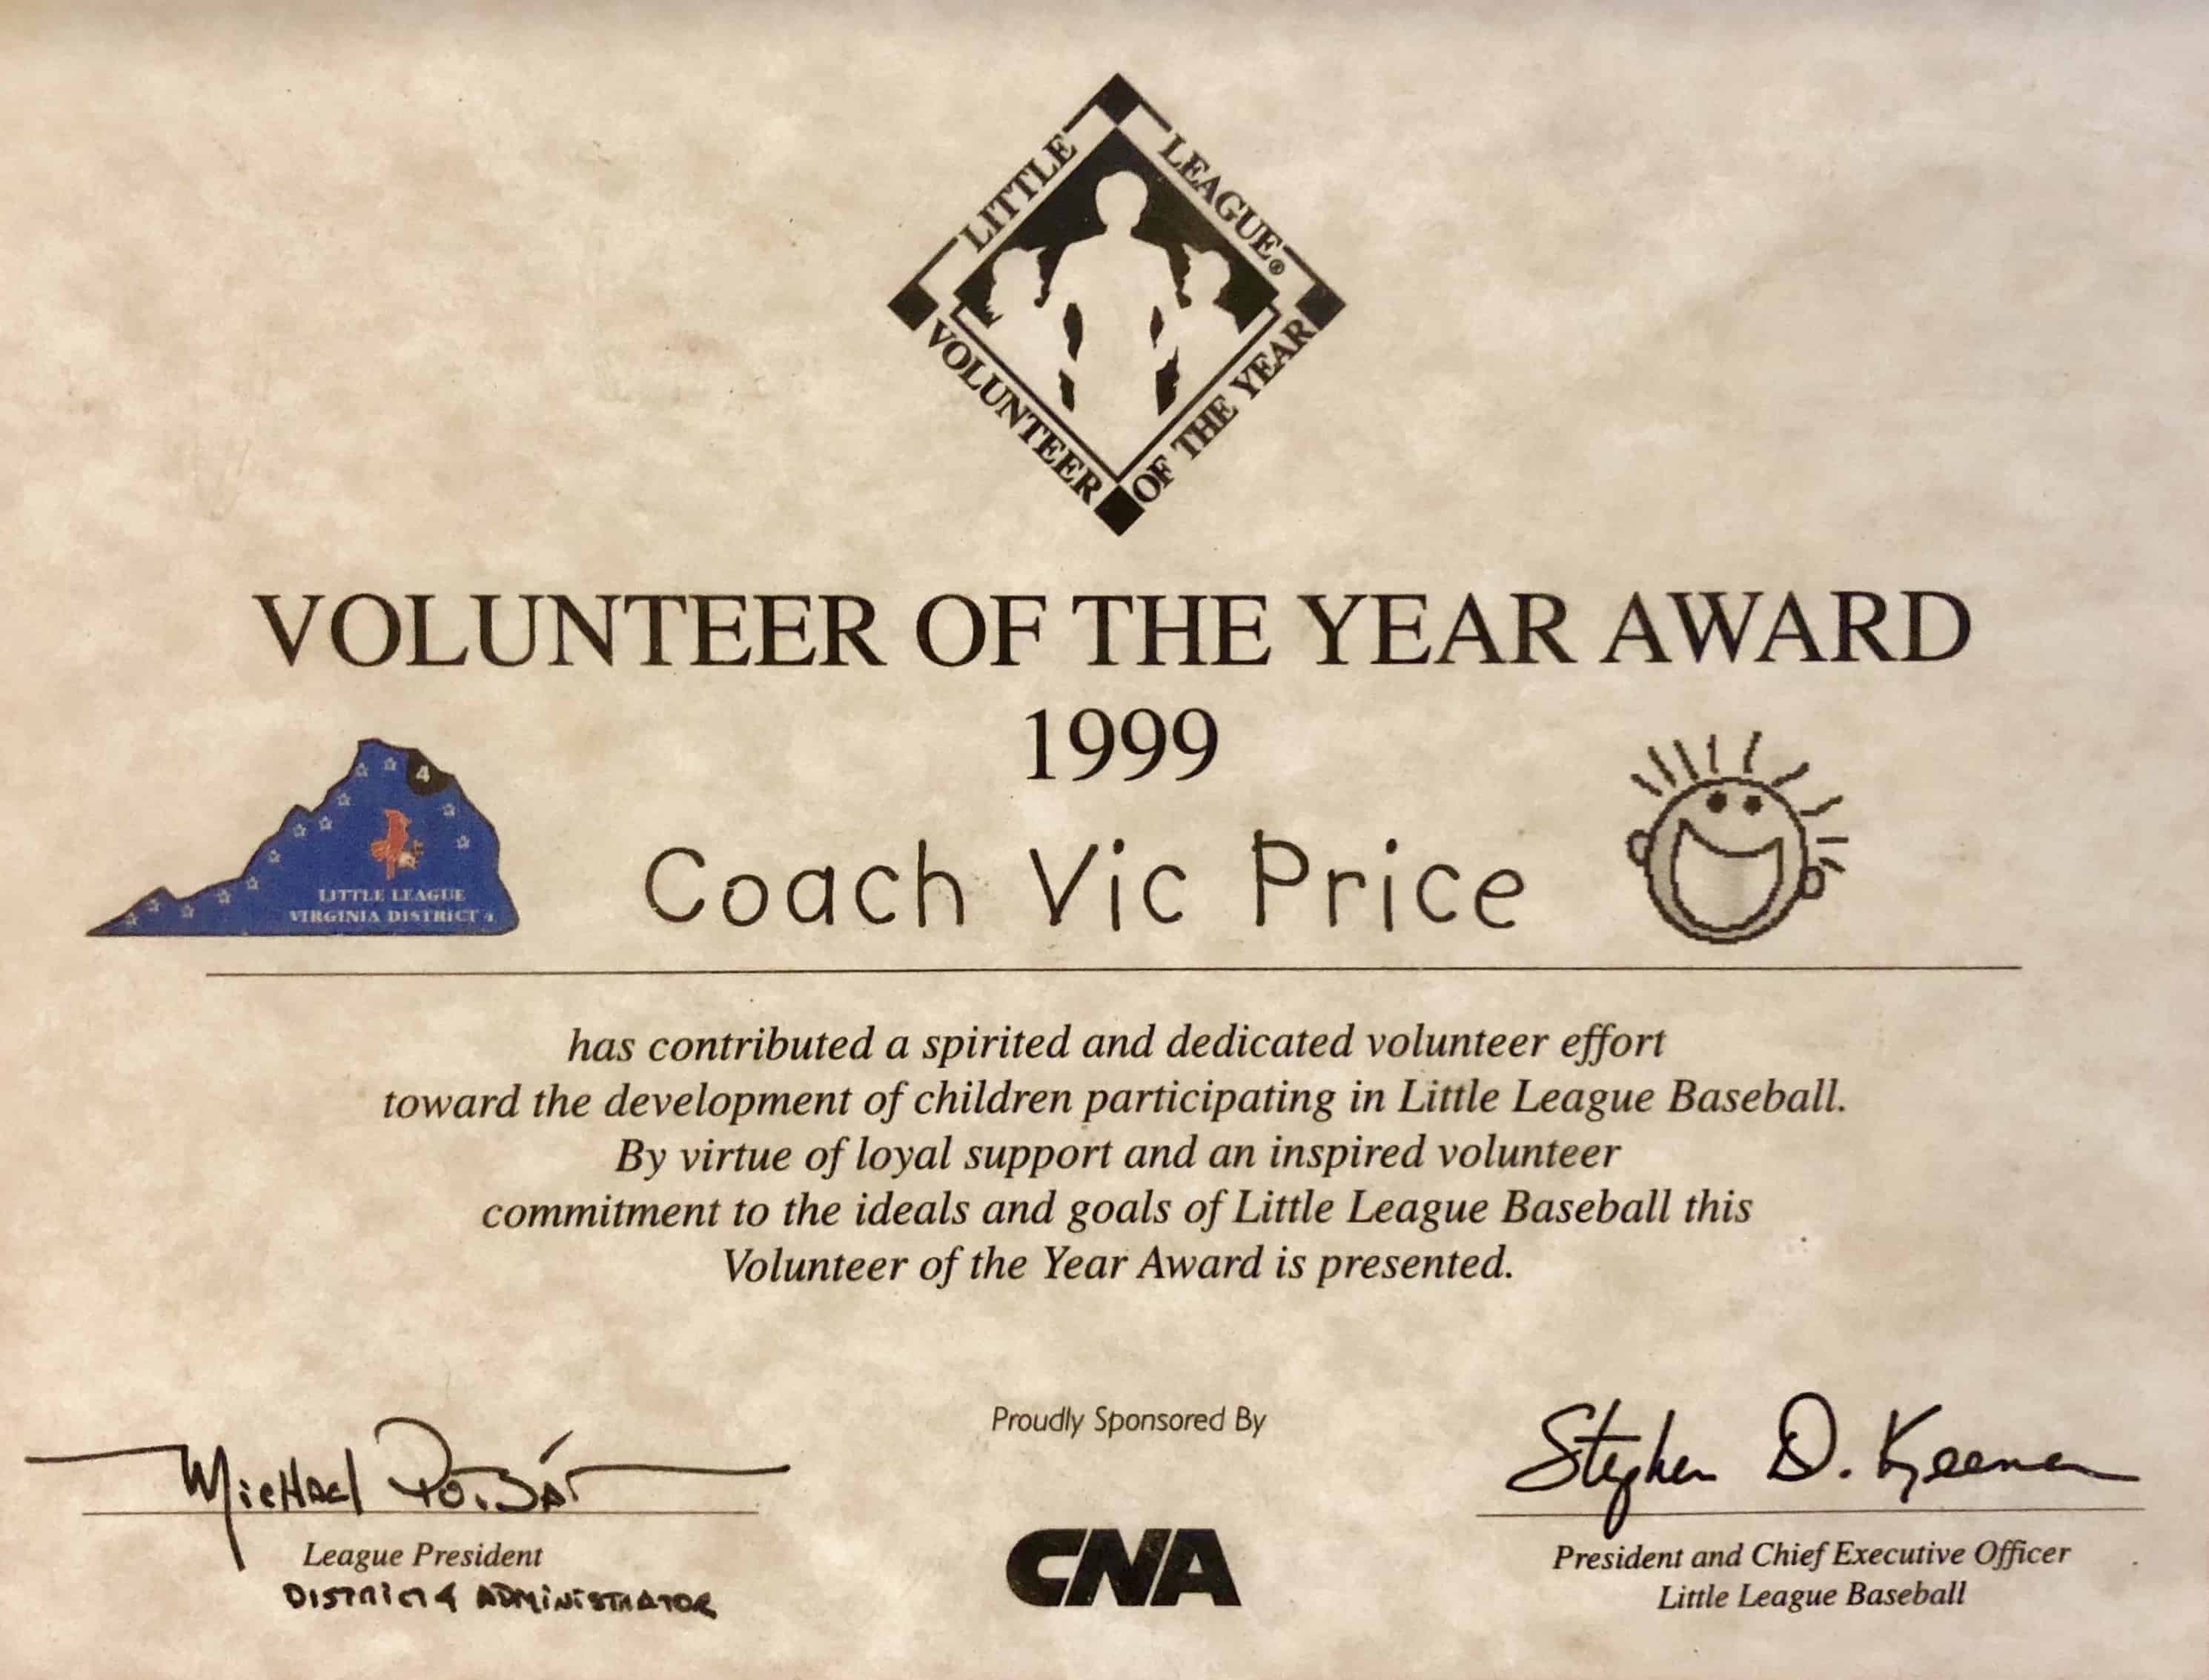 Little League Volunteer of the Year 1999 - Vic Price